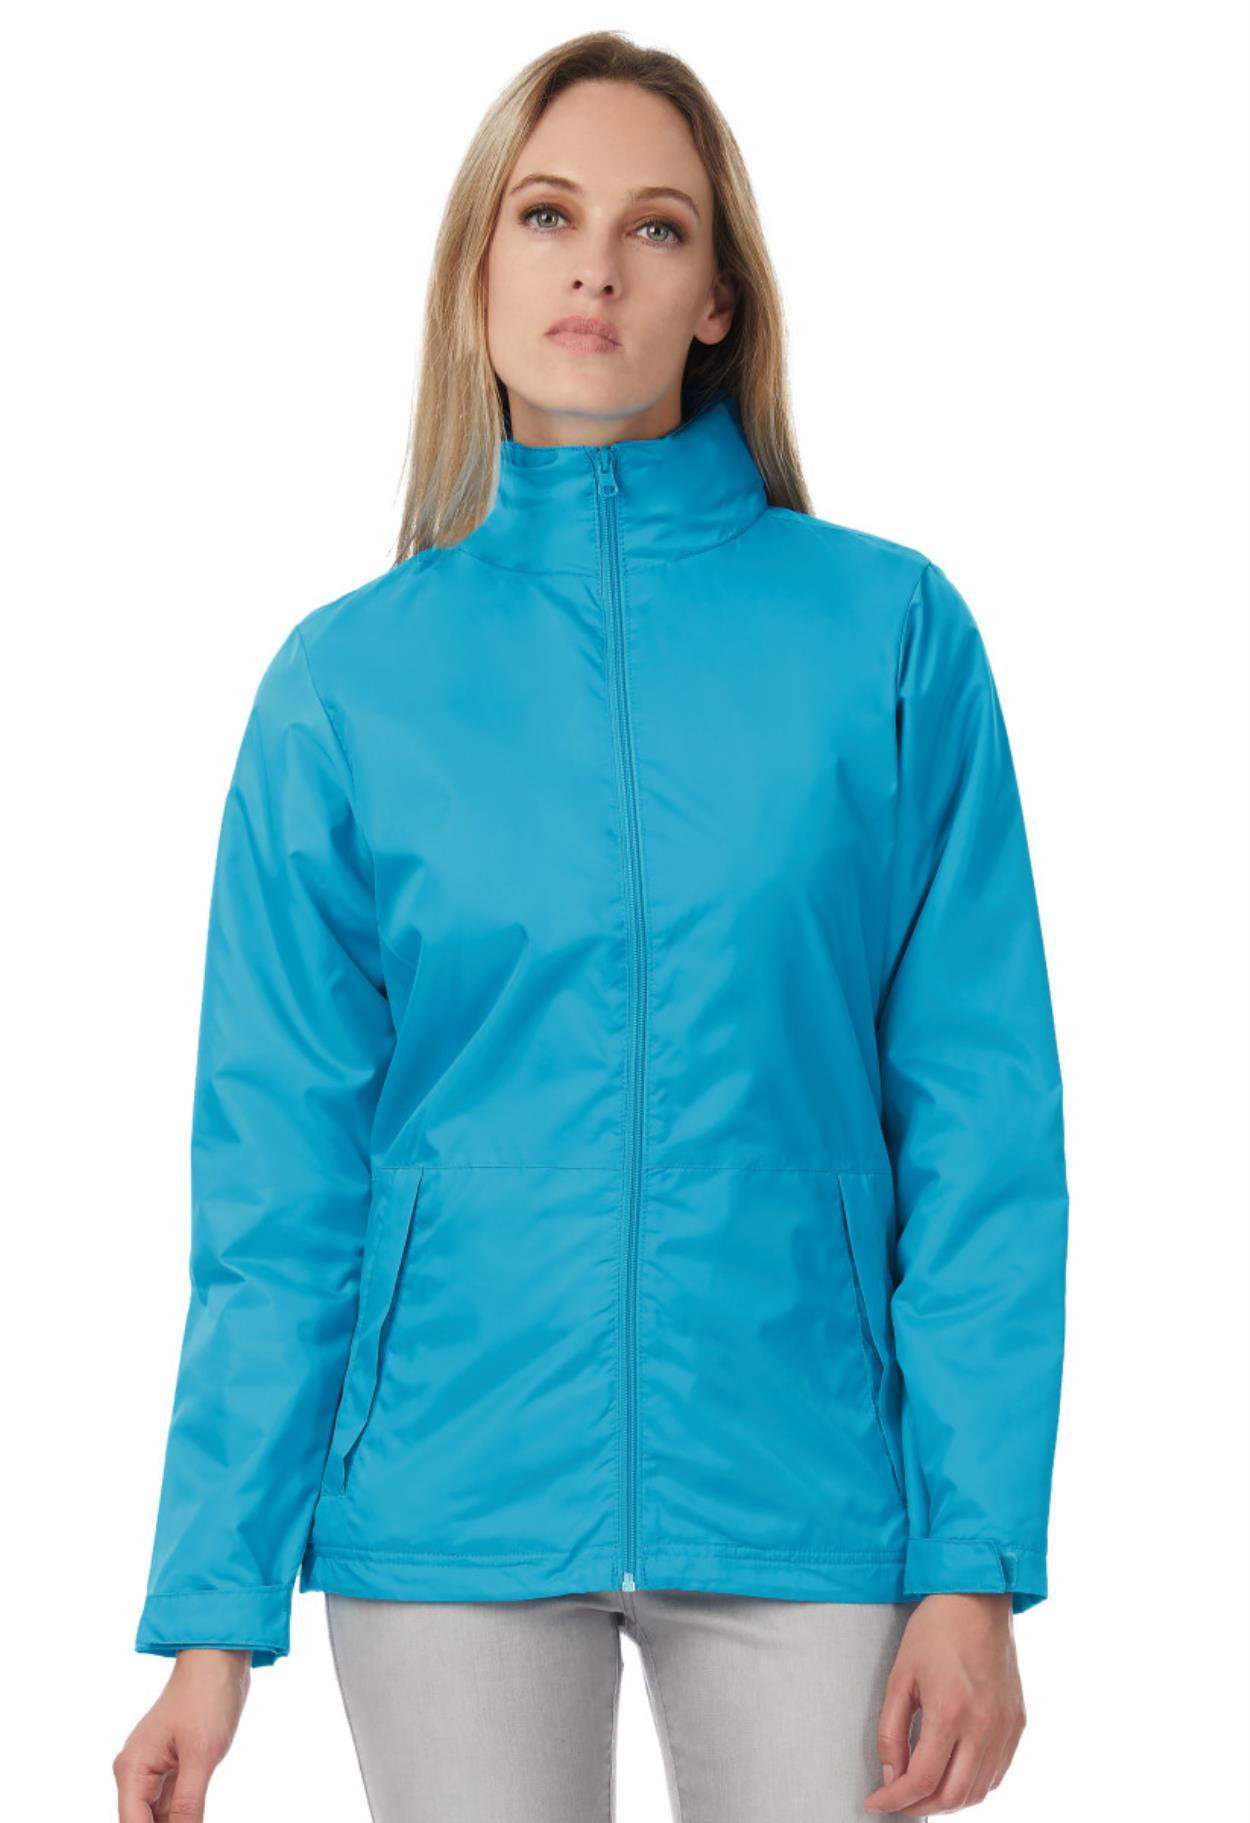 BA656F Women's Multi-Active Middleweight Jacket secondary Image